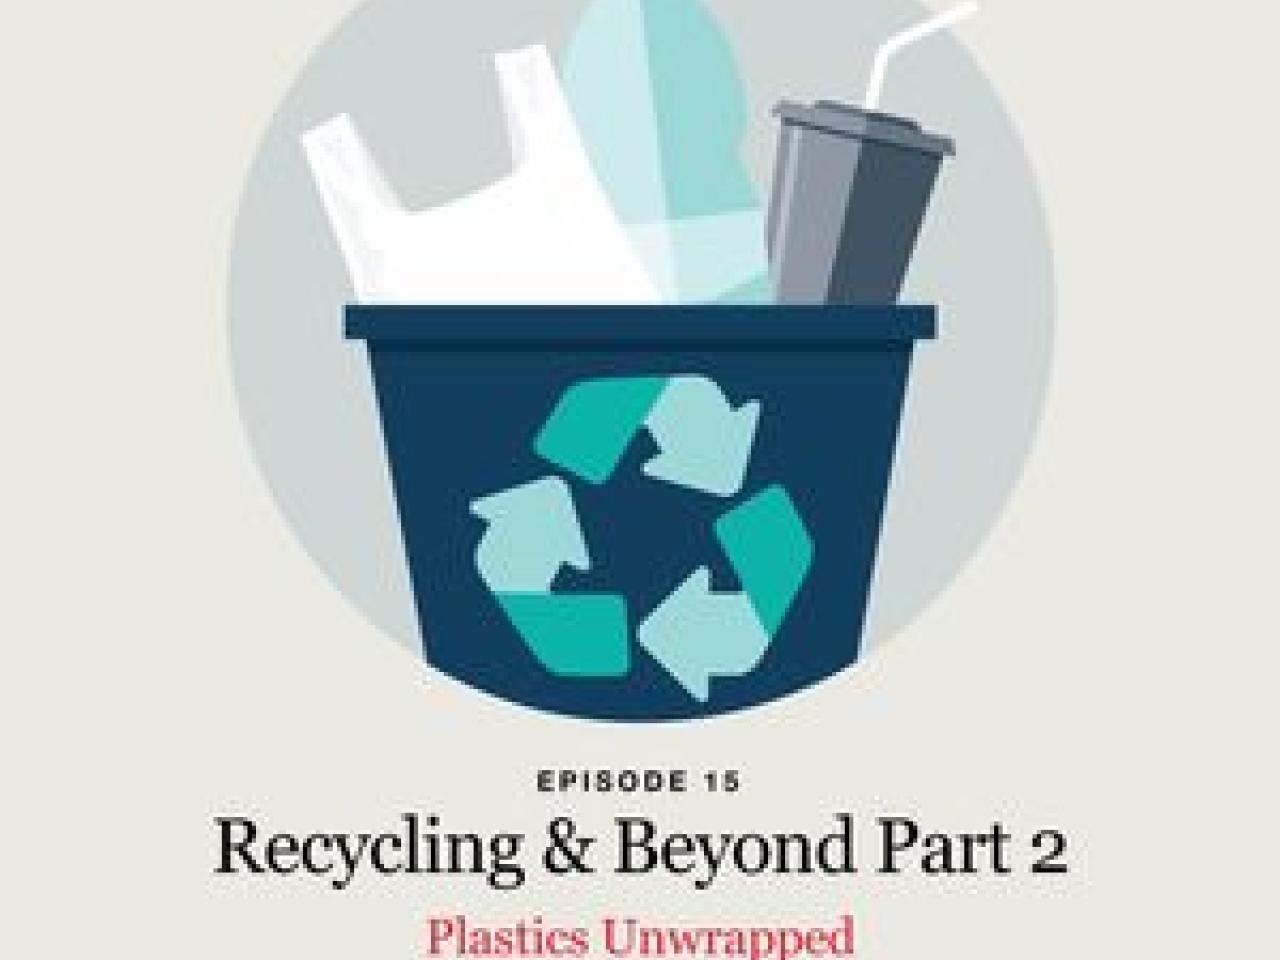 Illustration of a recycling bin with the text "Episode 15 Recycling & Beyond Part 2"